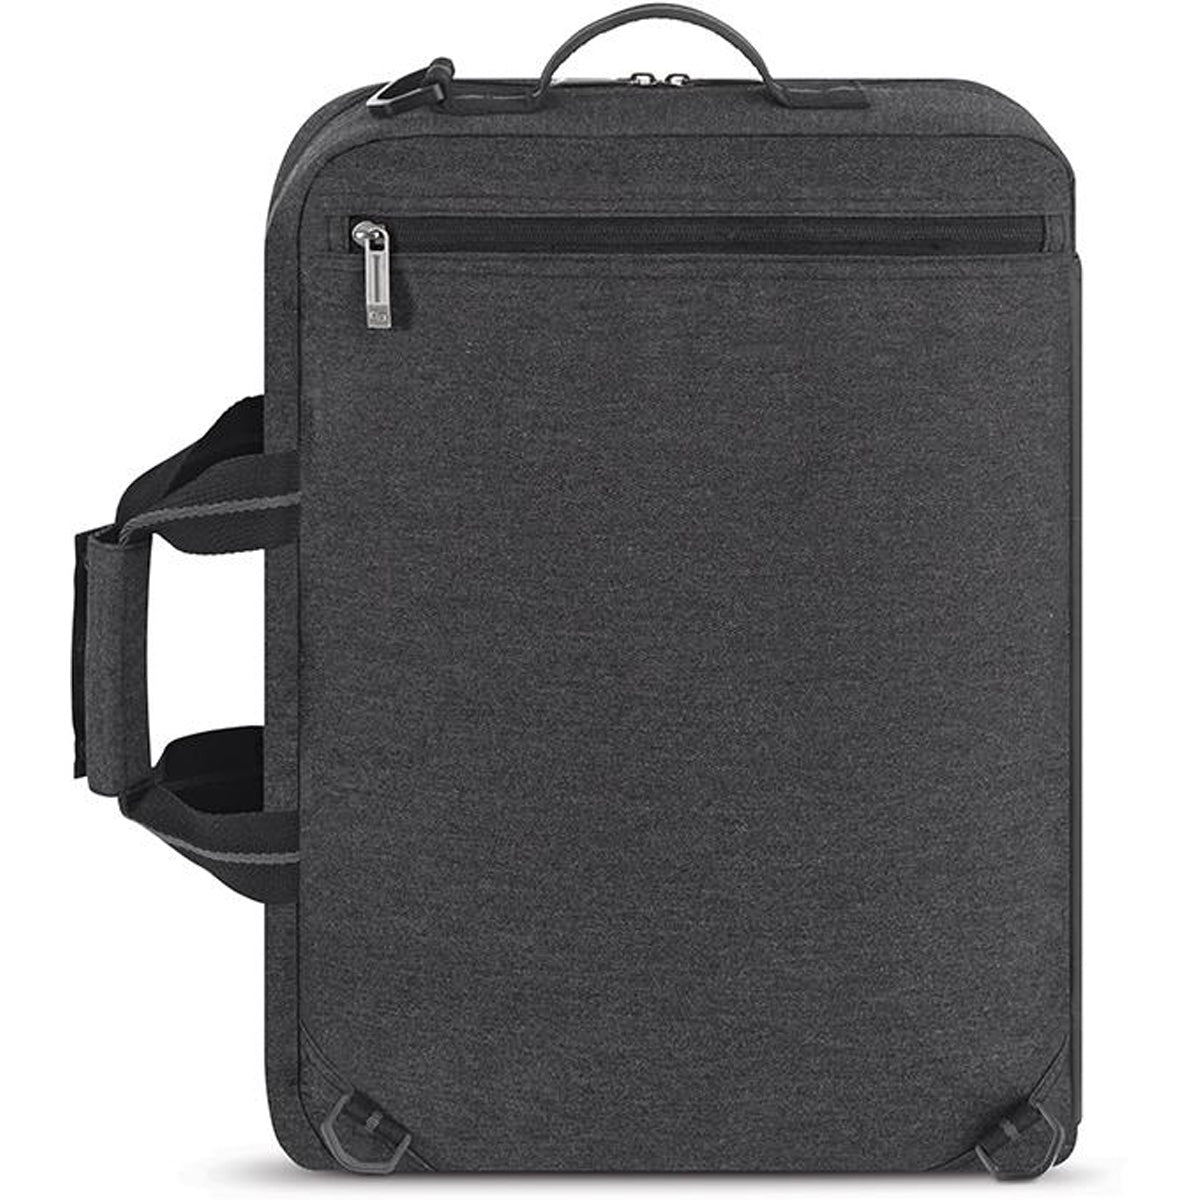 Solo New York Duane Hybrid Briefcase Backpack – Lexington Luggage